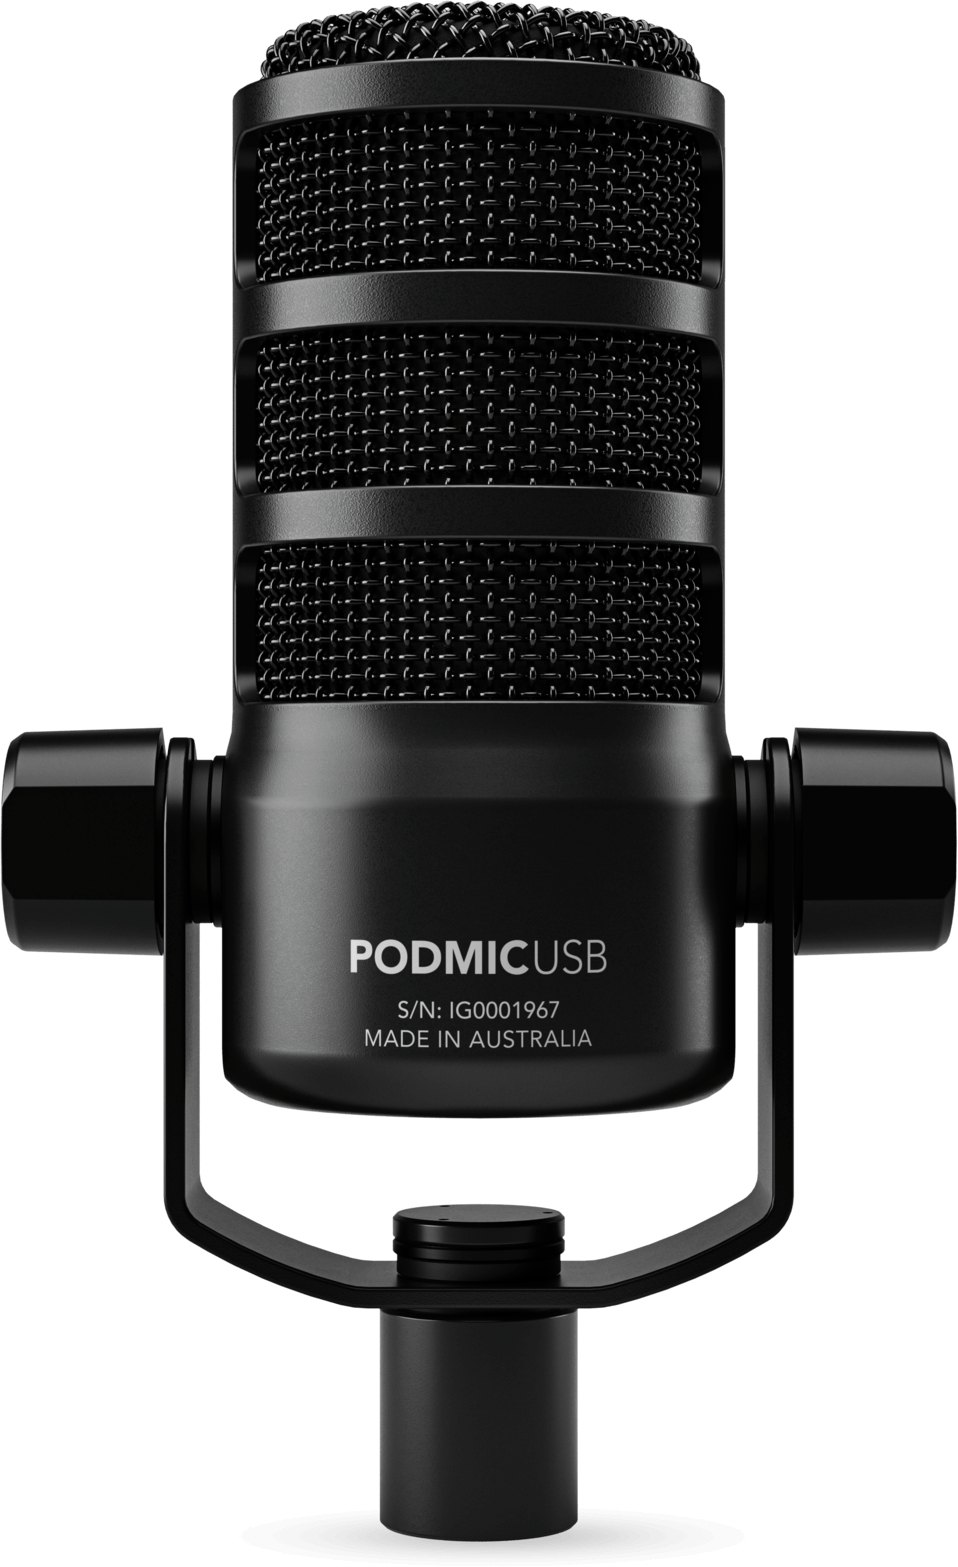 RØDE says that the PodMic USB is its “most versatile mic ever”